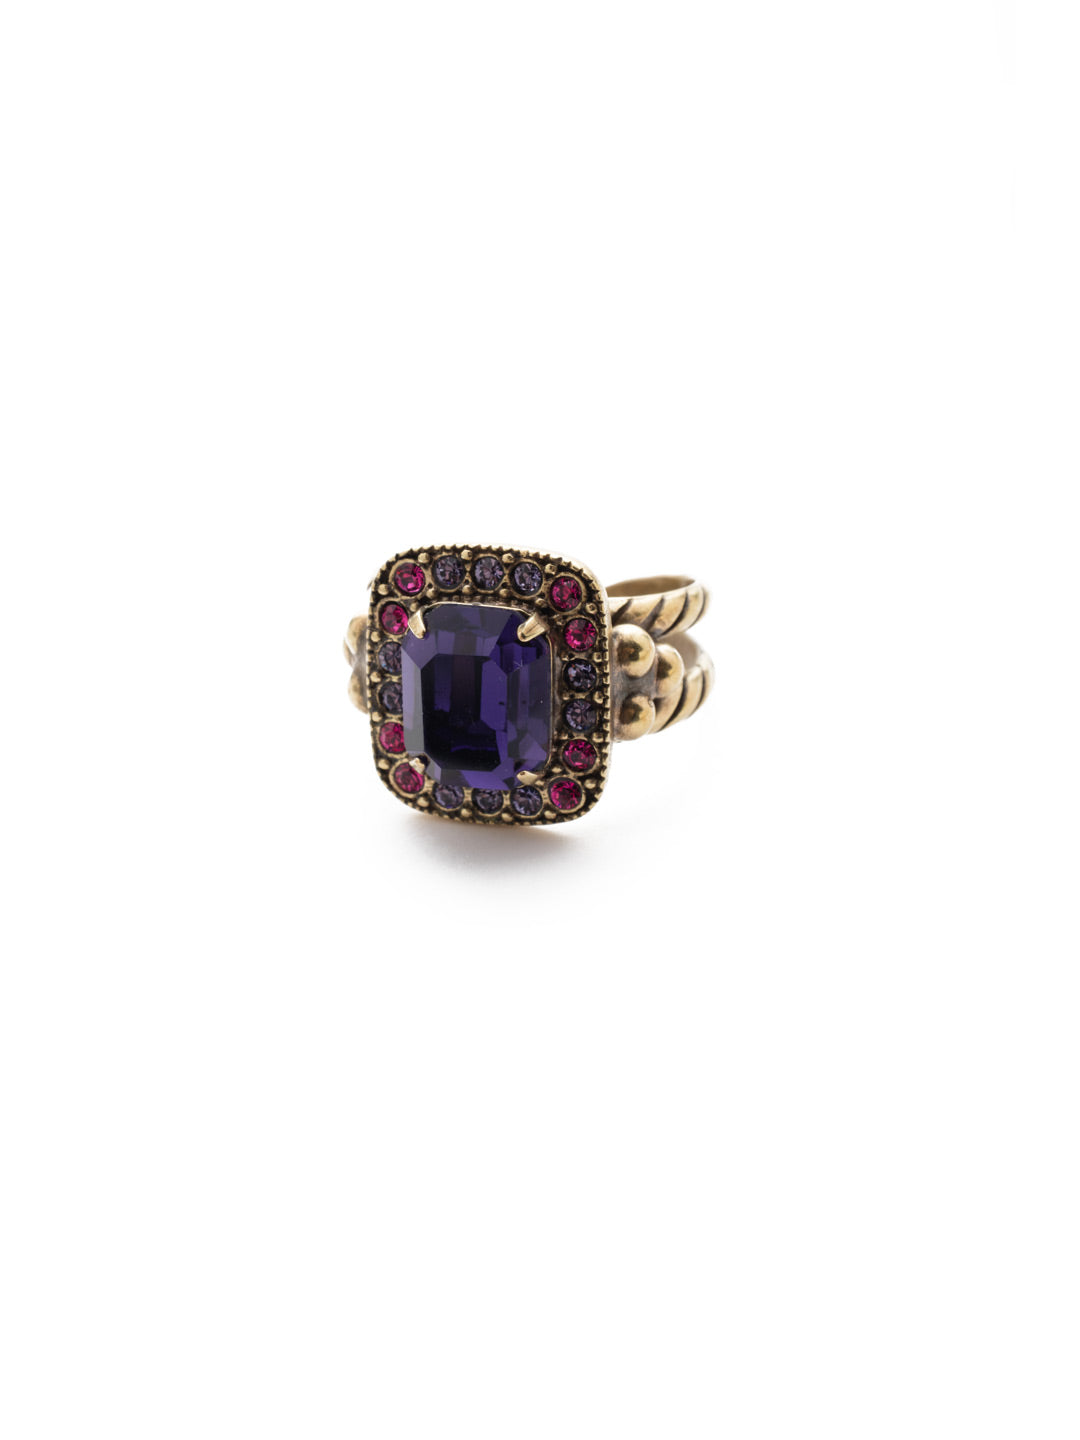 Product Image: Opulent Octagon Cocktail Ring